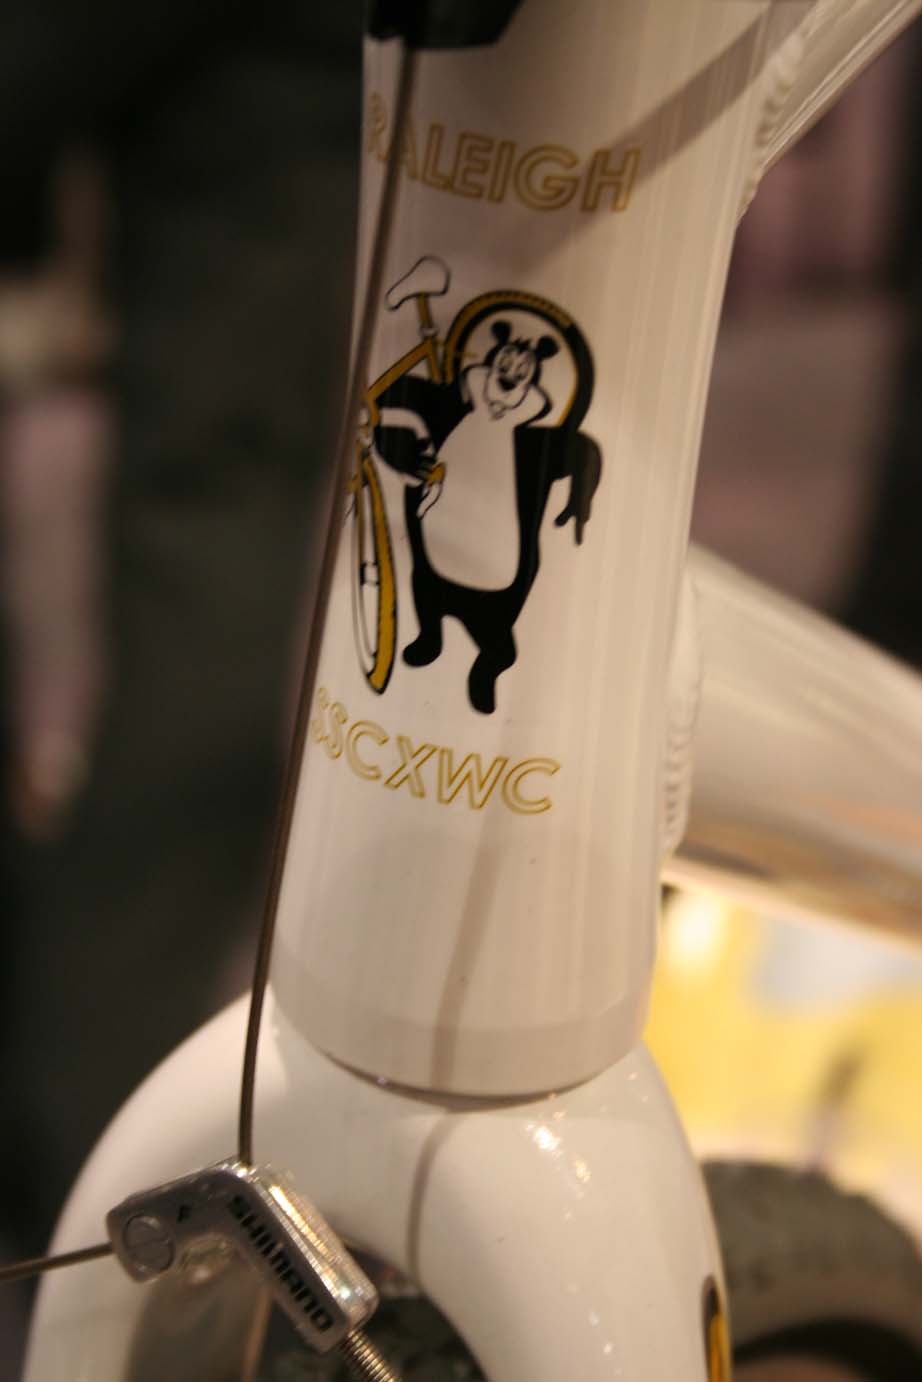 A special edition SSCXWC head tube badge. by Andrew Yee